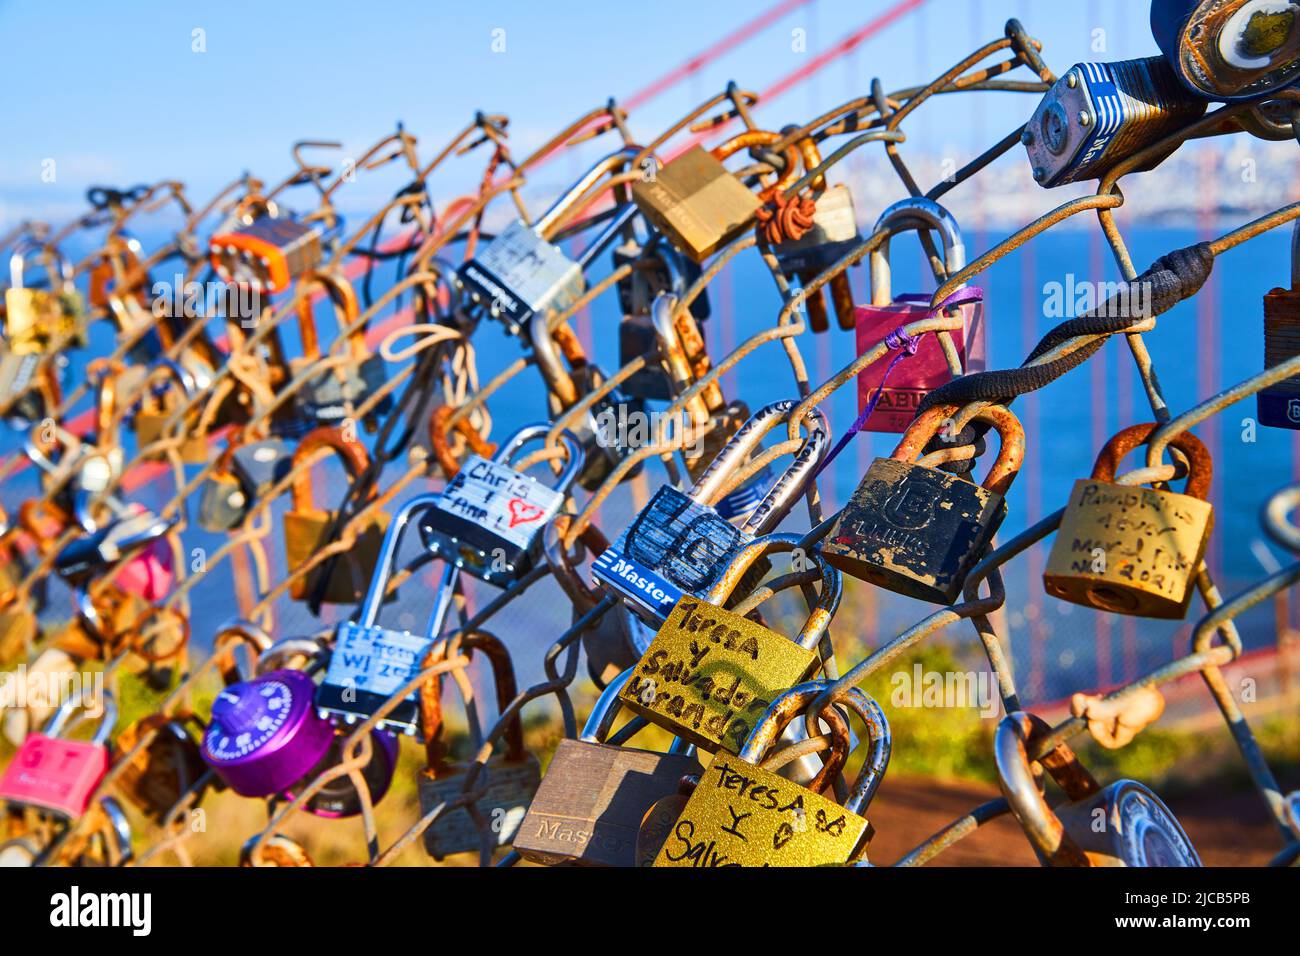 Locks covering up chain linked fence in San Francisco Stock Photo